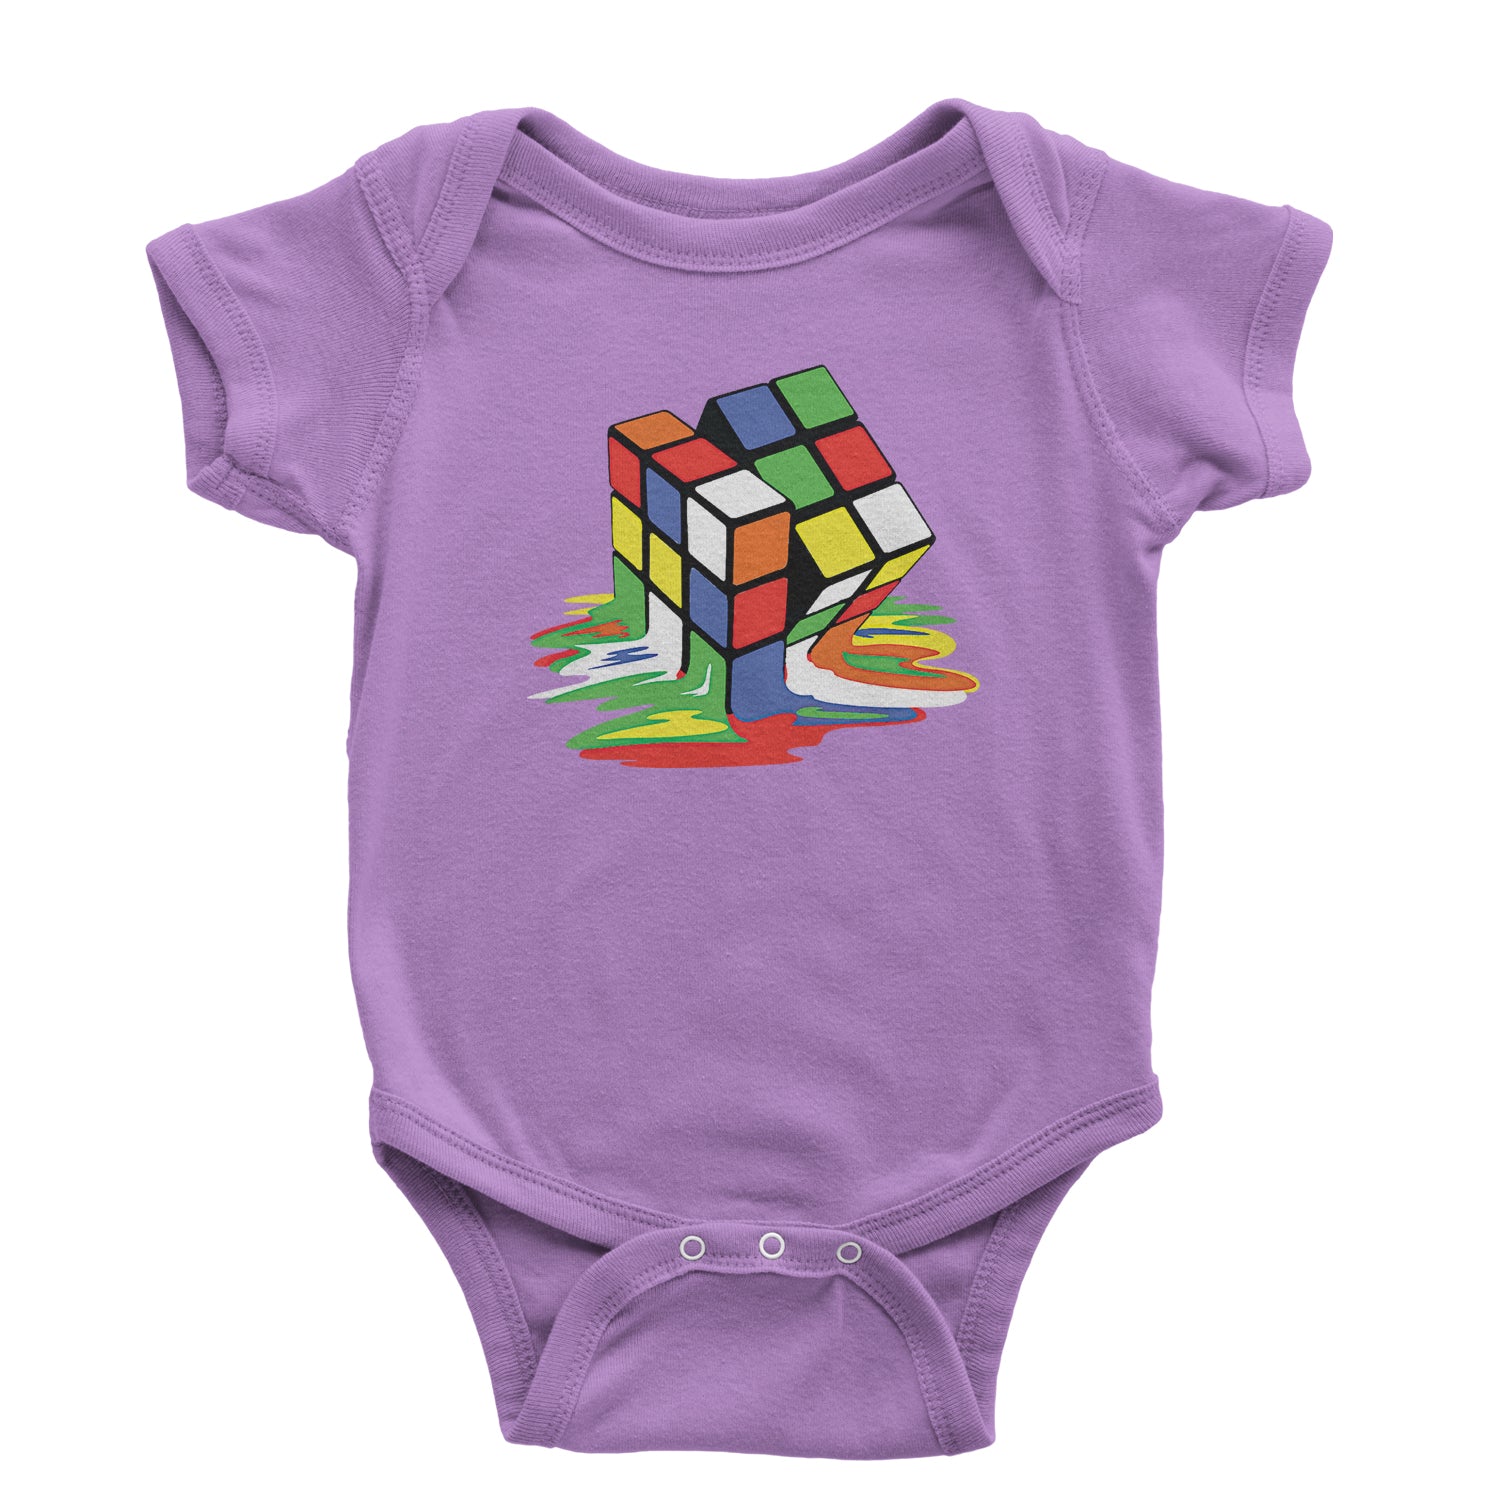 Melting Multi-Colored Cube Infant One-Piece Romper Bodysuit and Toddler T-shirt gamer, gaming, nerd, shirt by Expression Tees